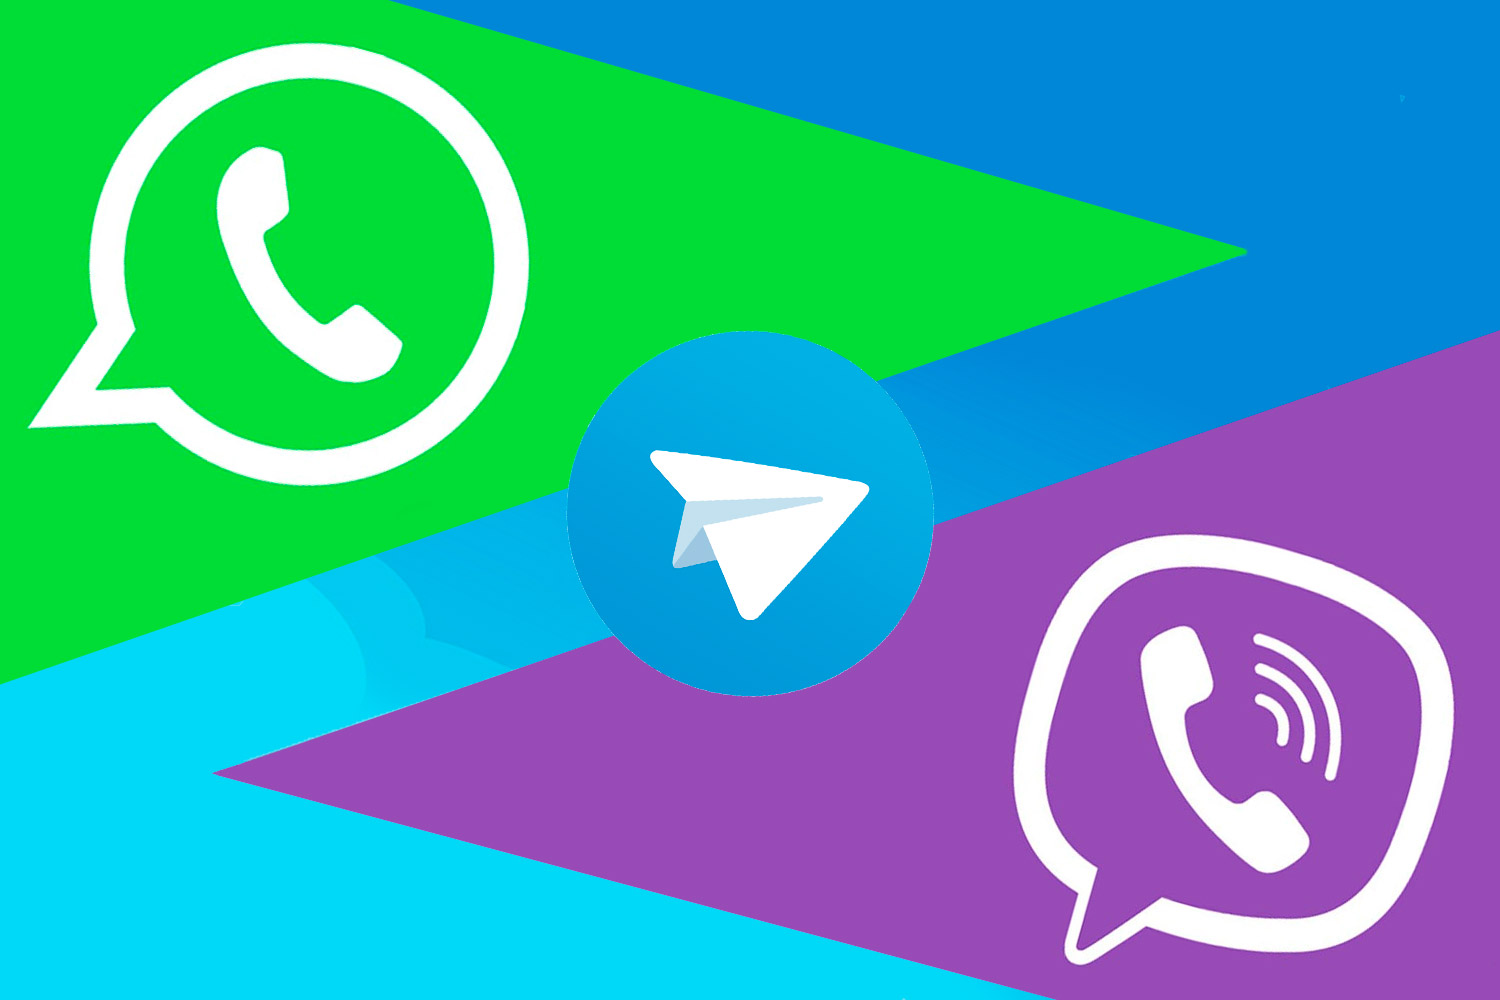 Why Telegram "more abruptly", than WhatsApp and Viber? 